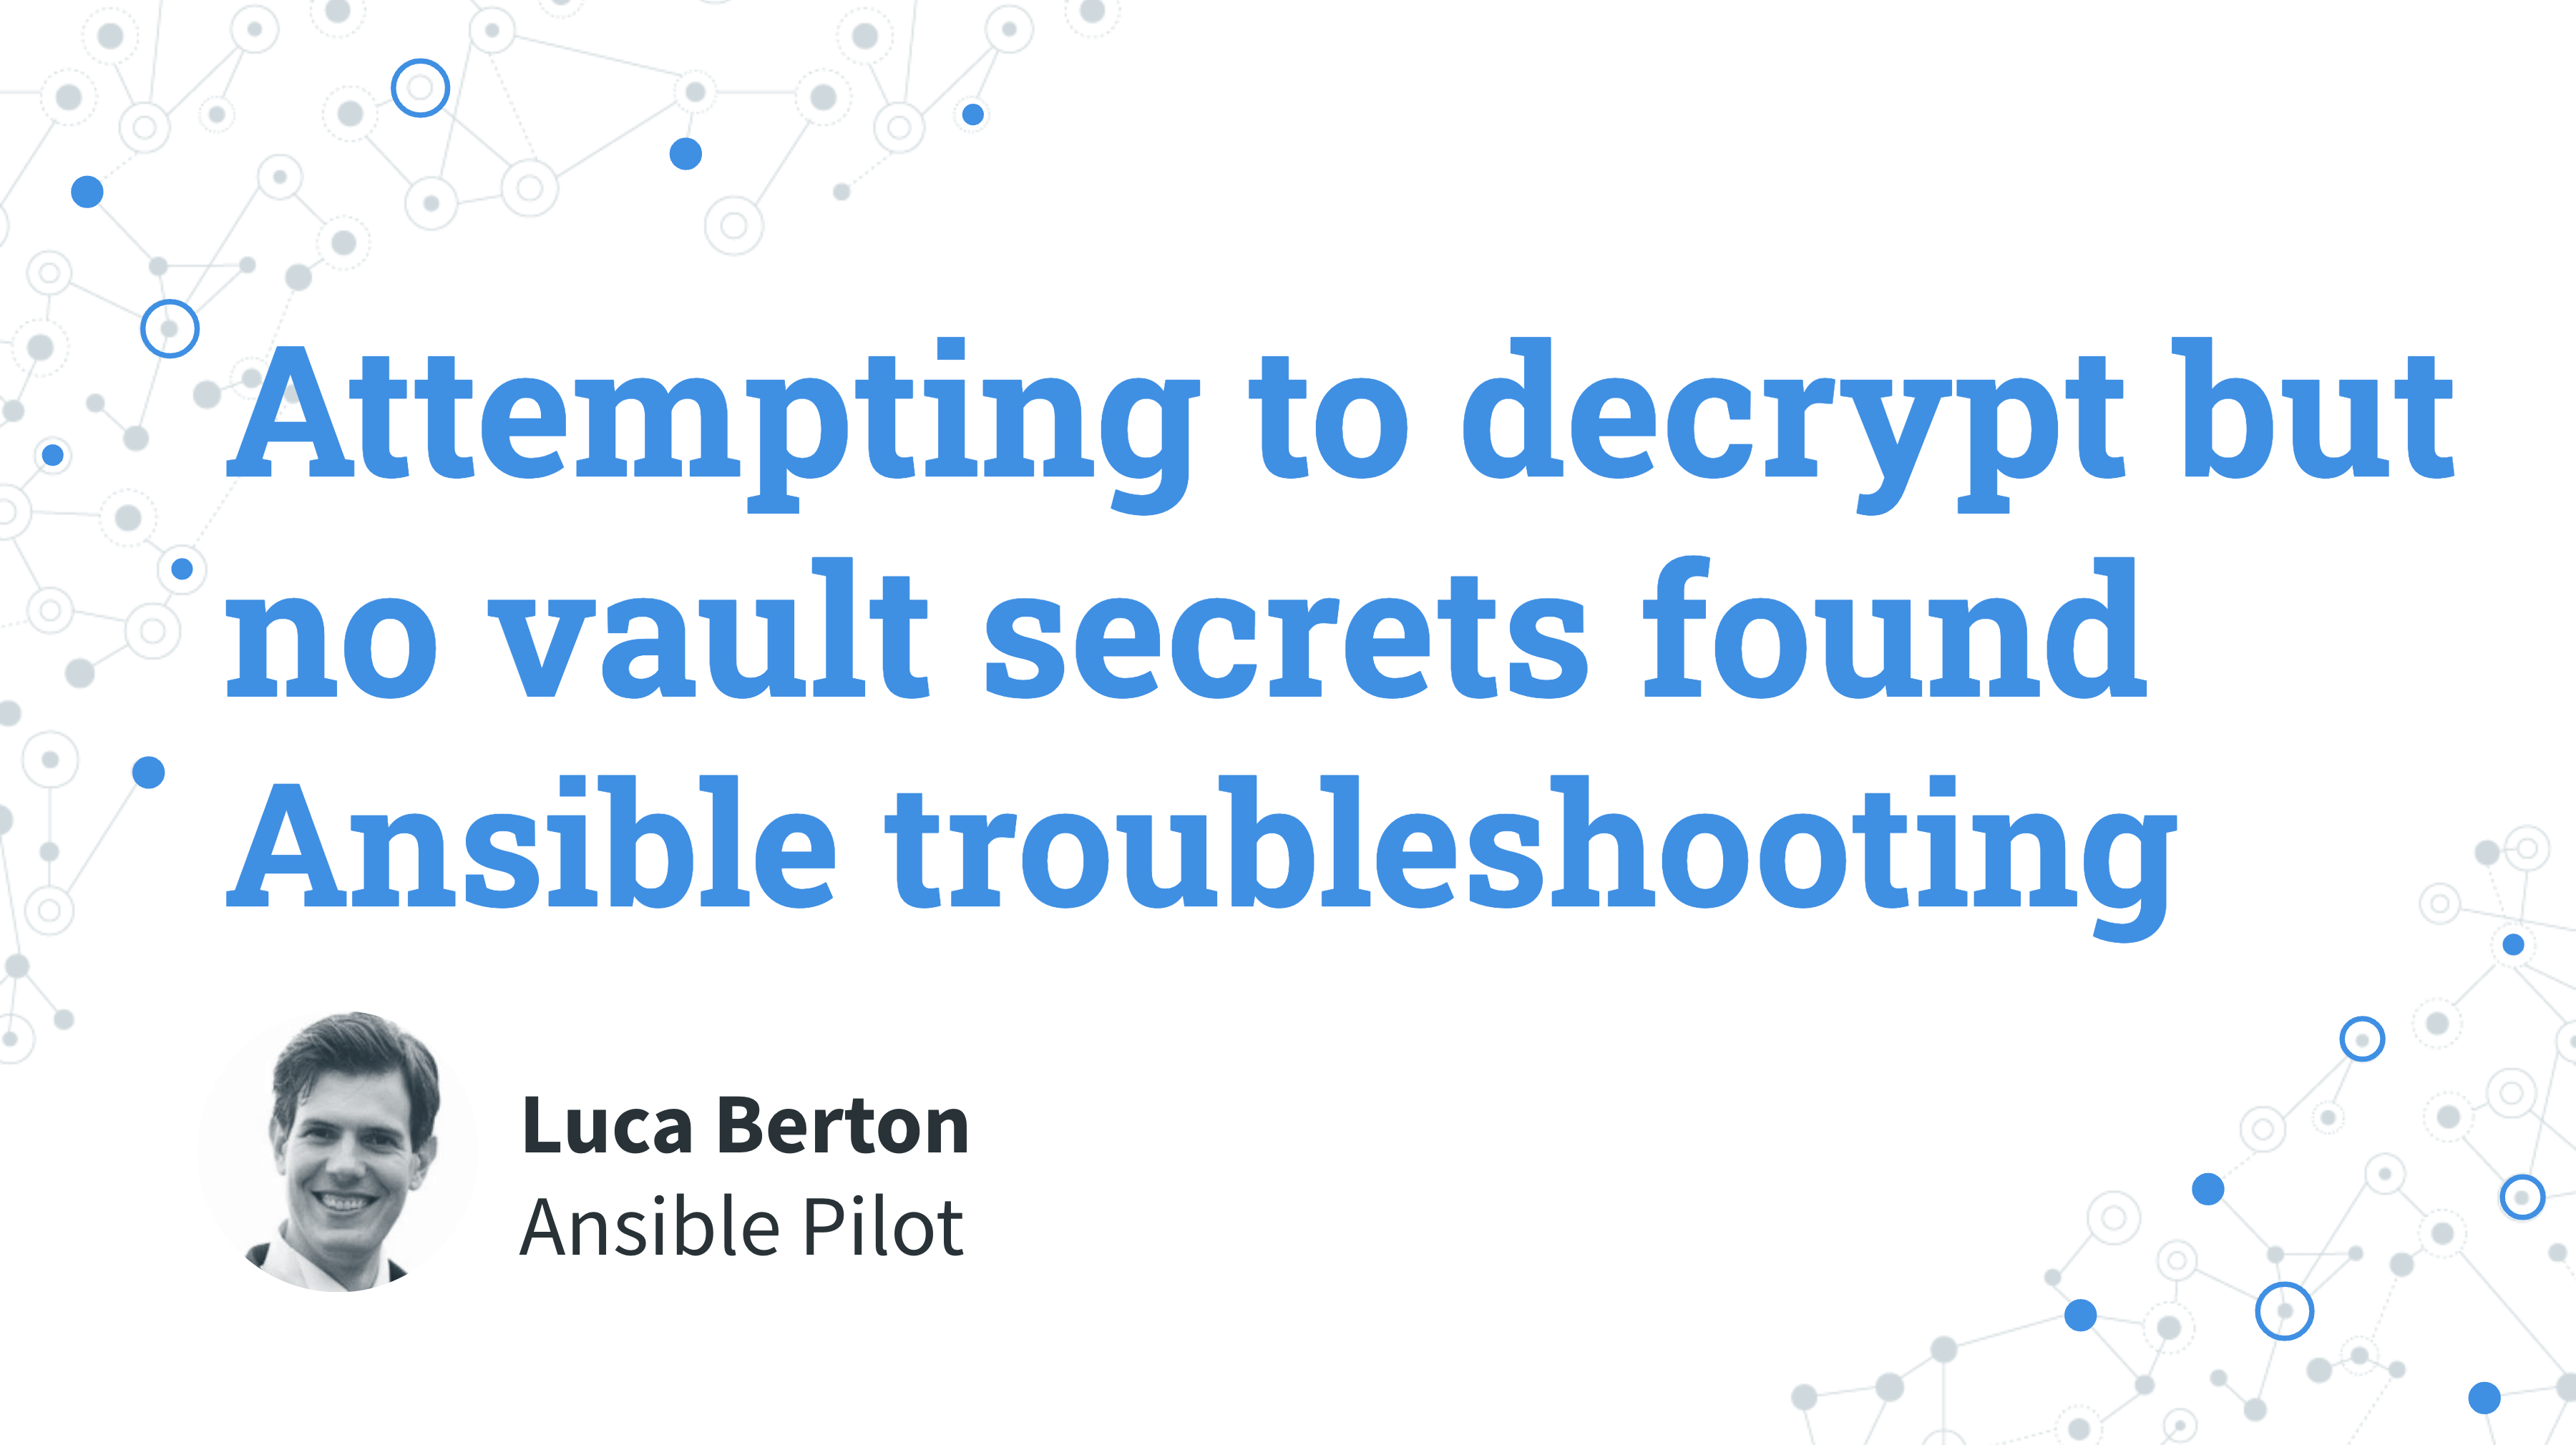 Ansible troubleshooting - Attempting to decrypt but no vault secrets found